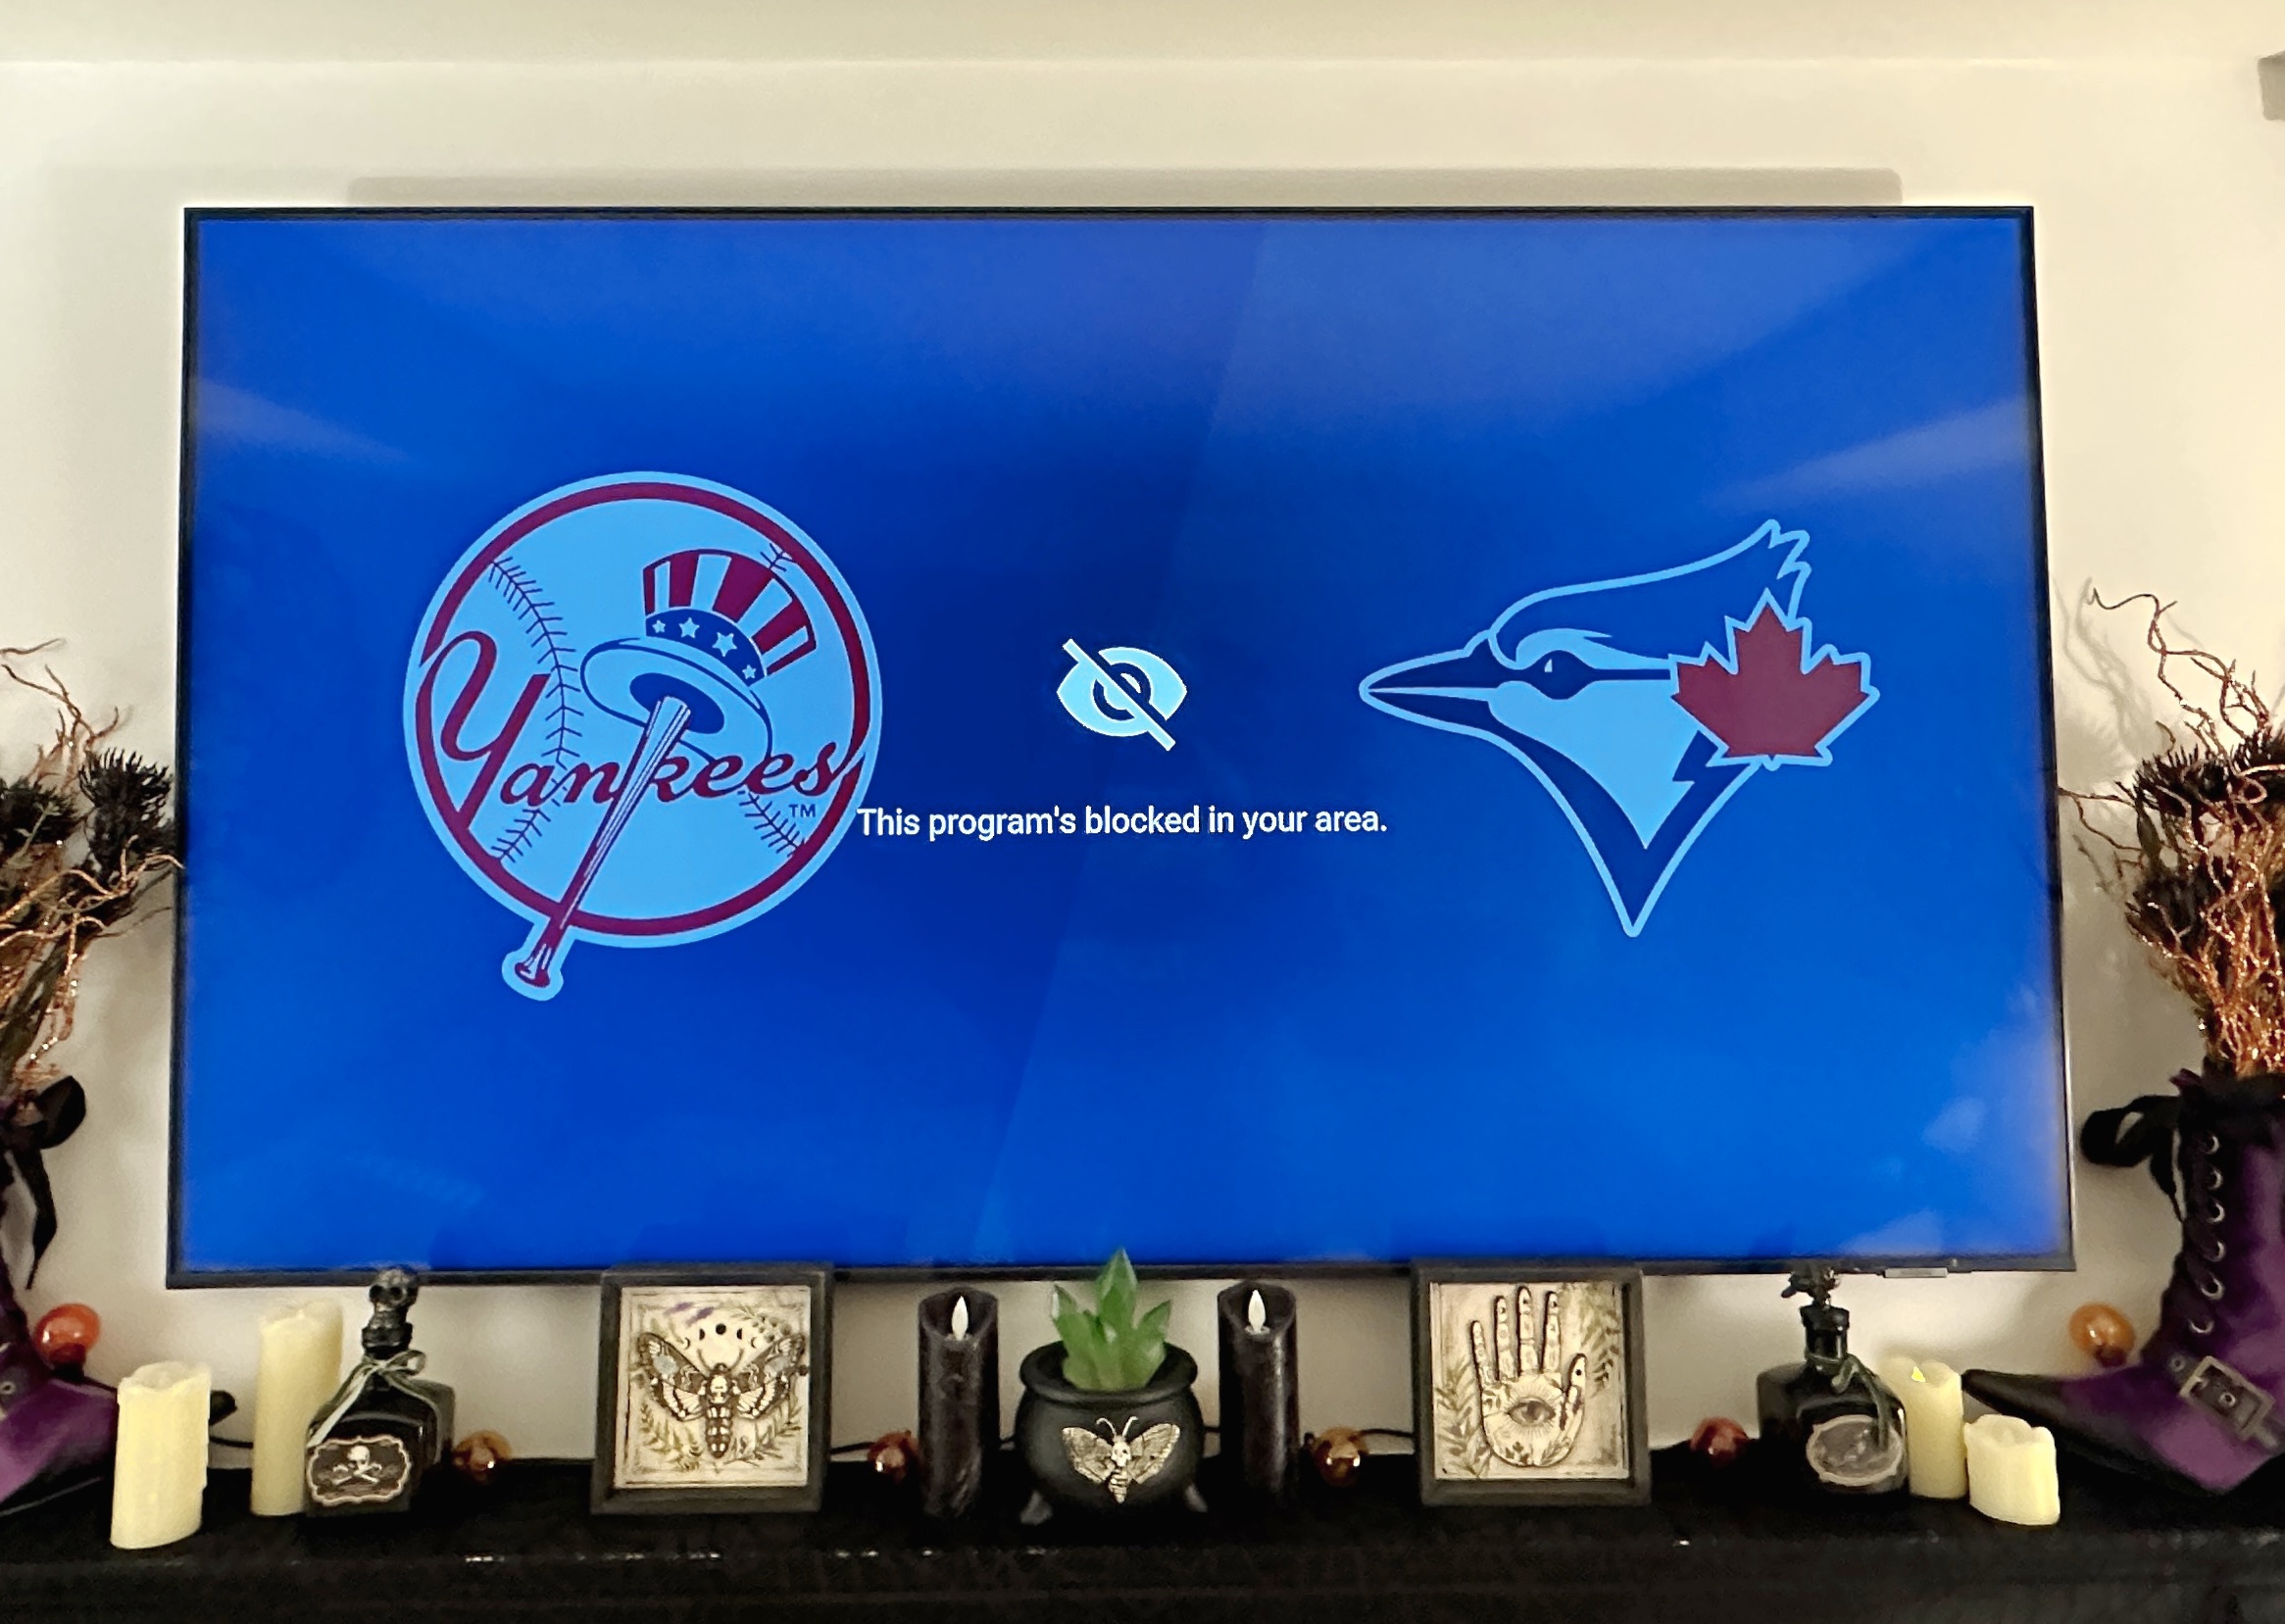 A TV above a mantel with a graphic showing the Yankees vs. Blue Jays game is blocked in this region.